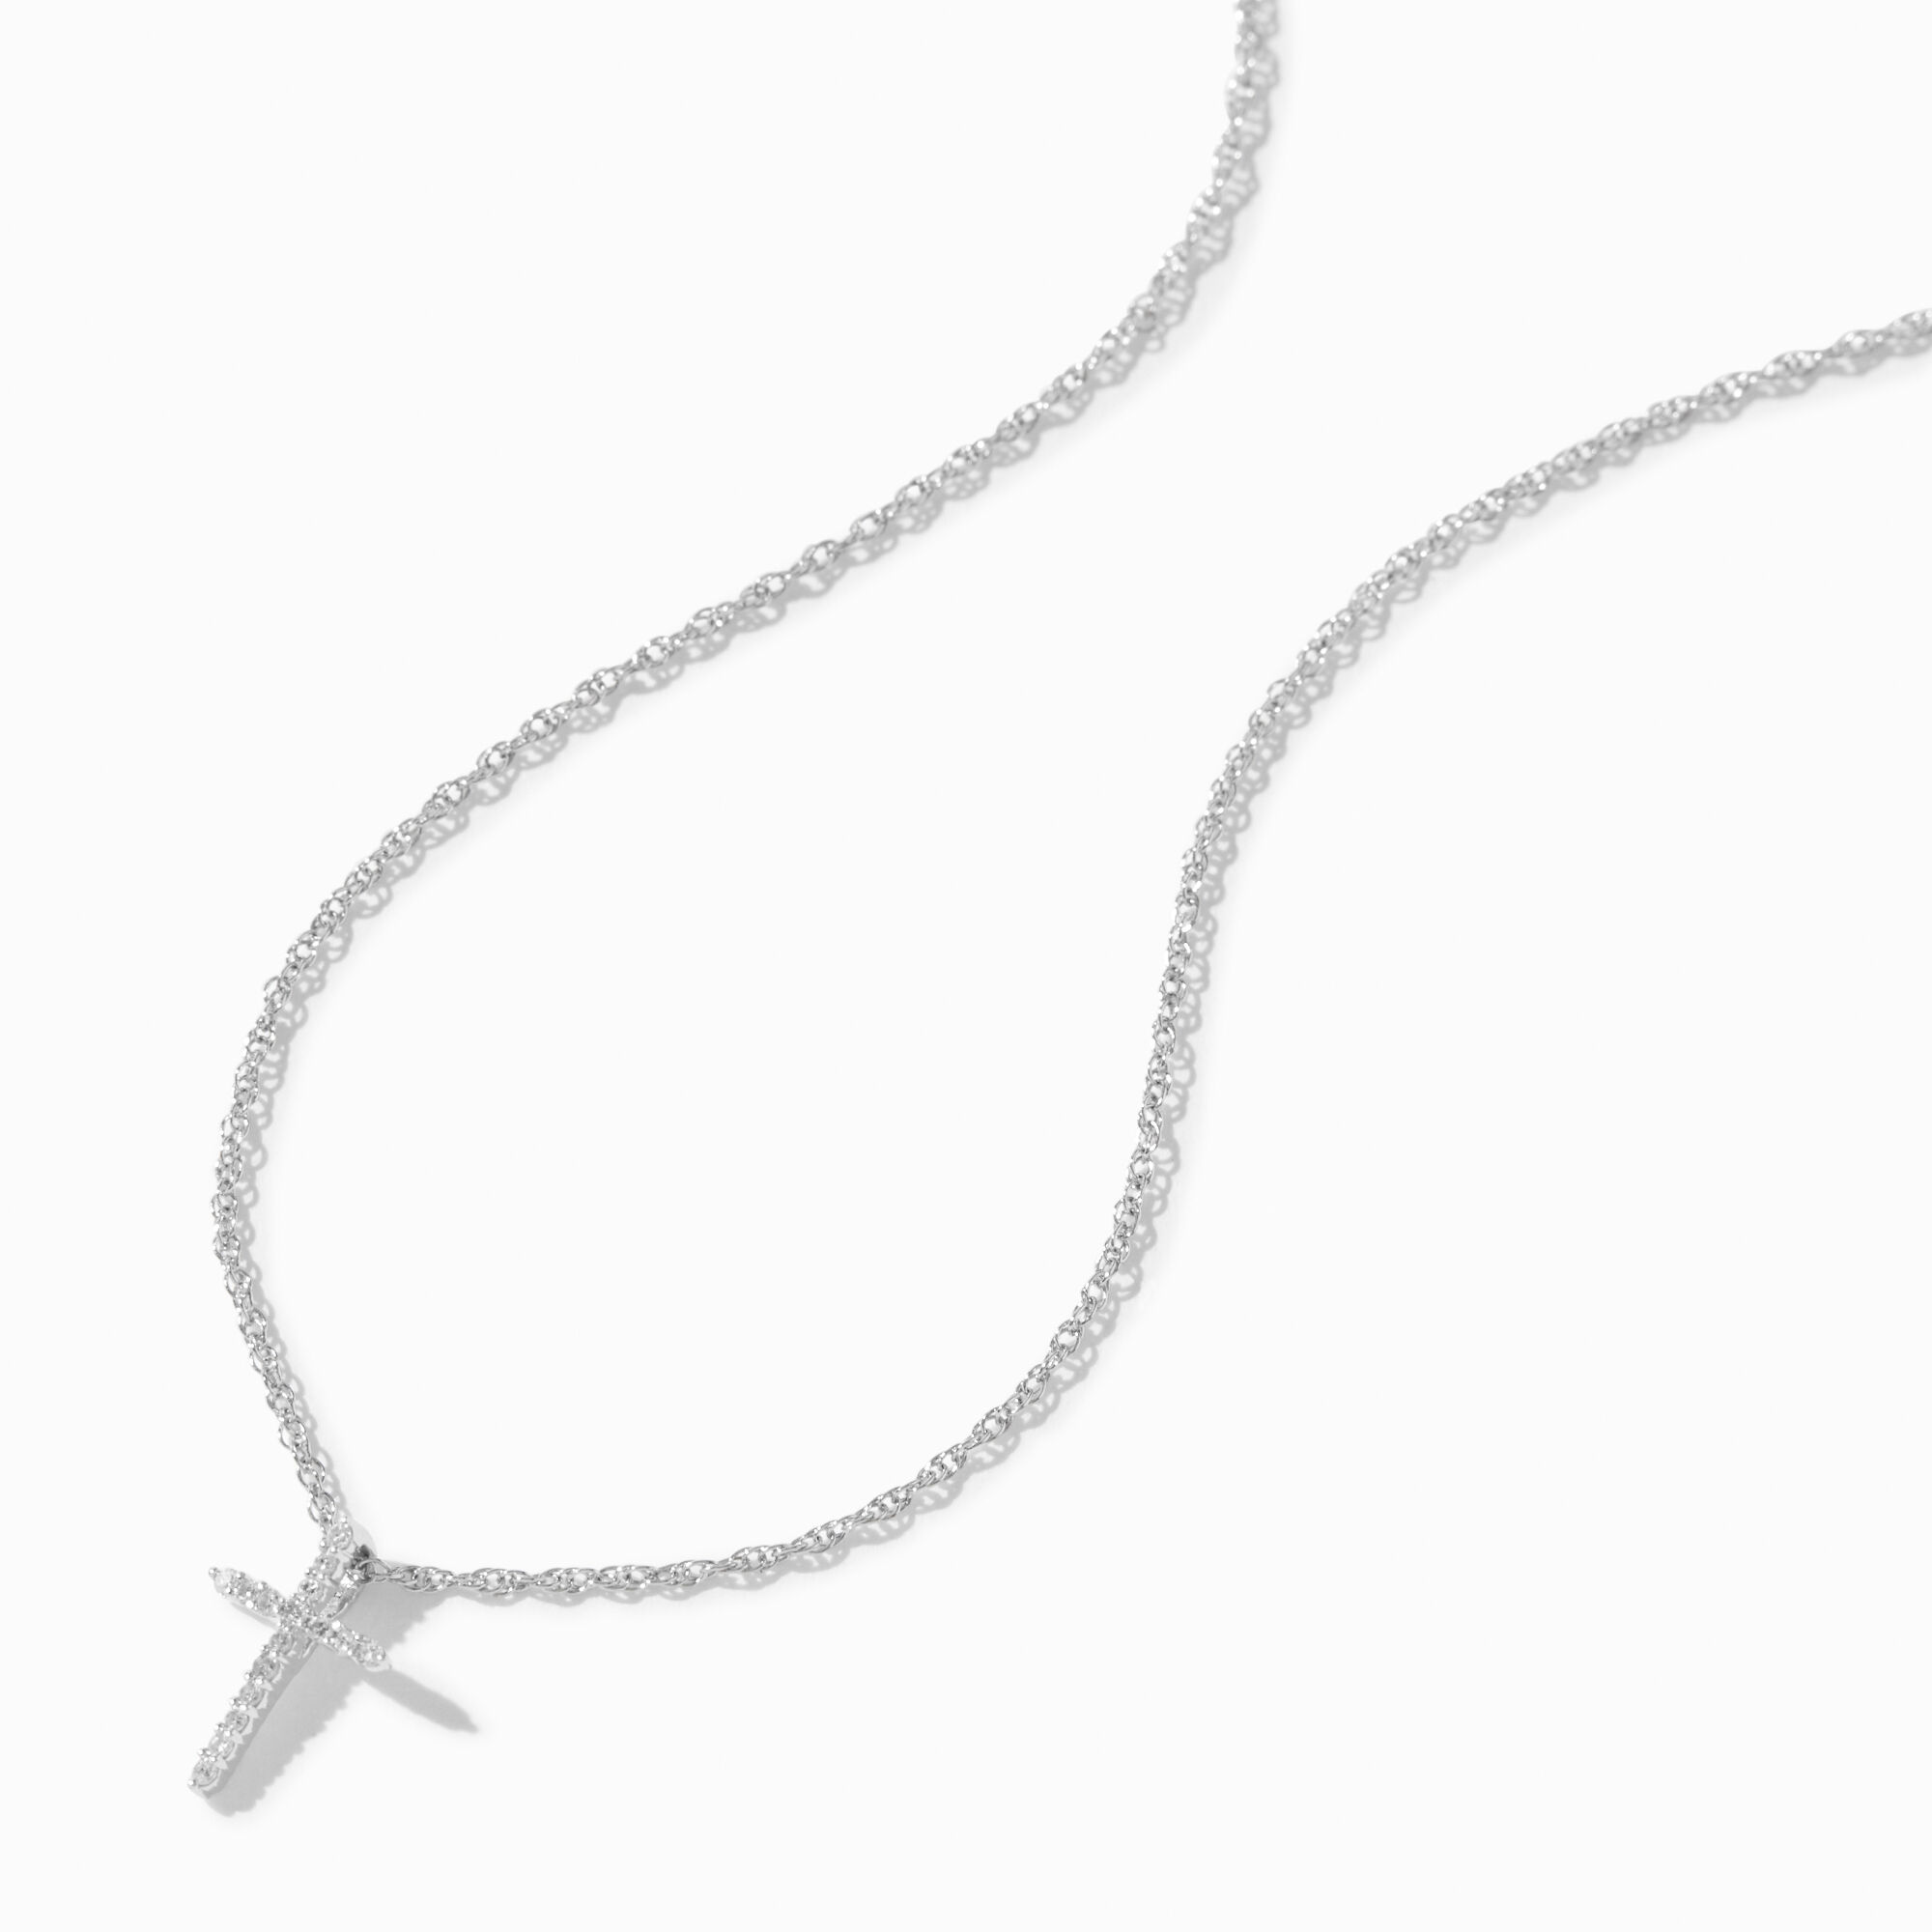 View C Luxe By Claires 120 Ct Tw Laboratory Grown Diamond Cross Pendant Necklace Silver information